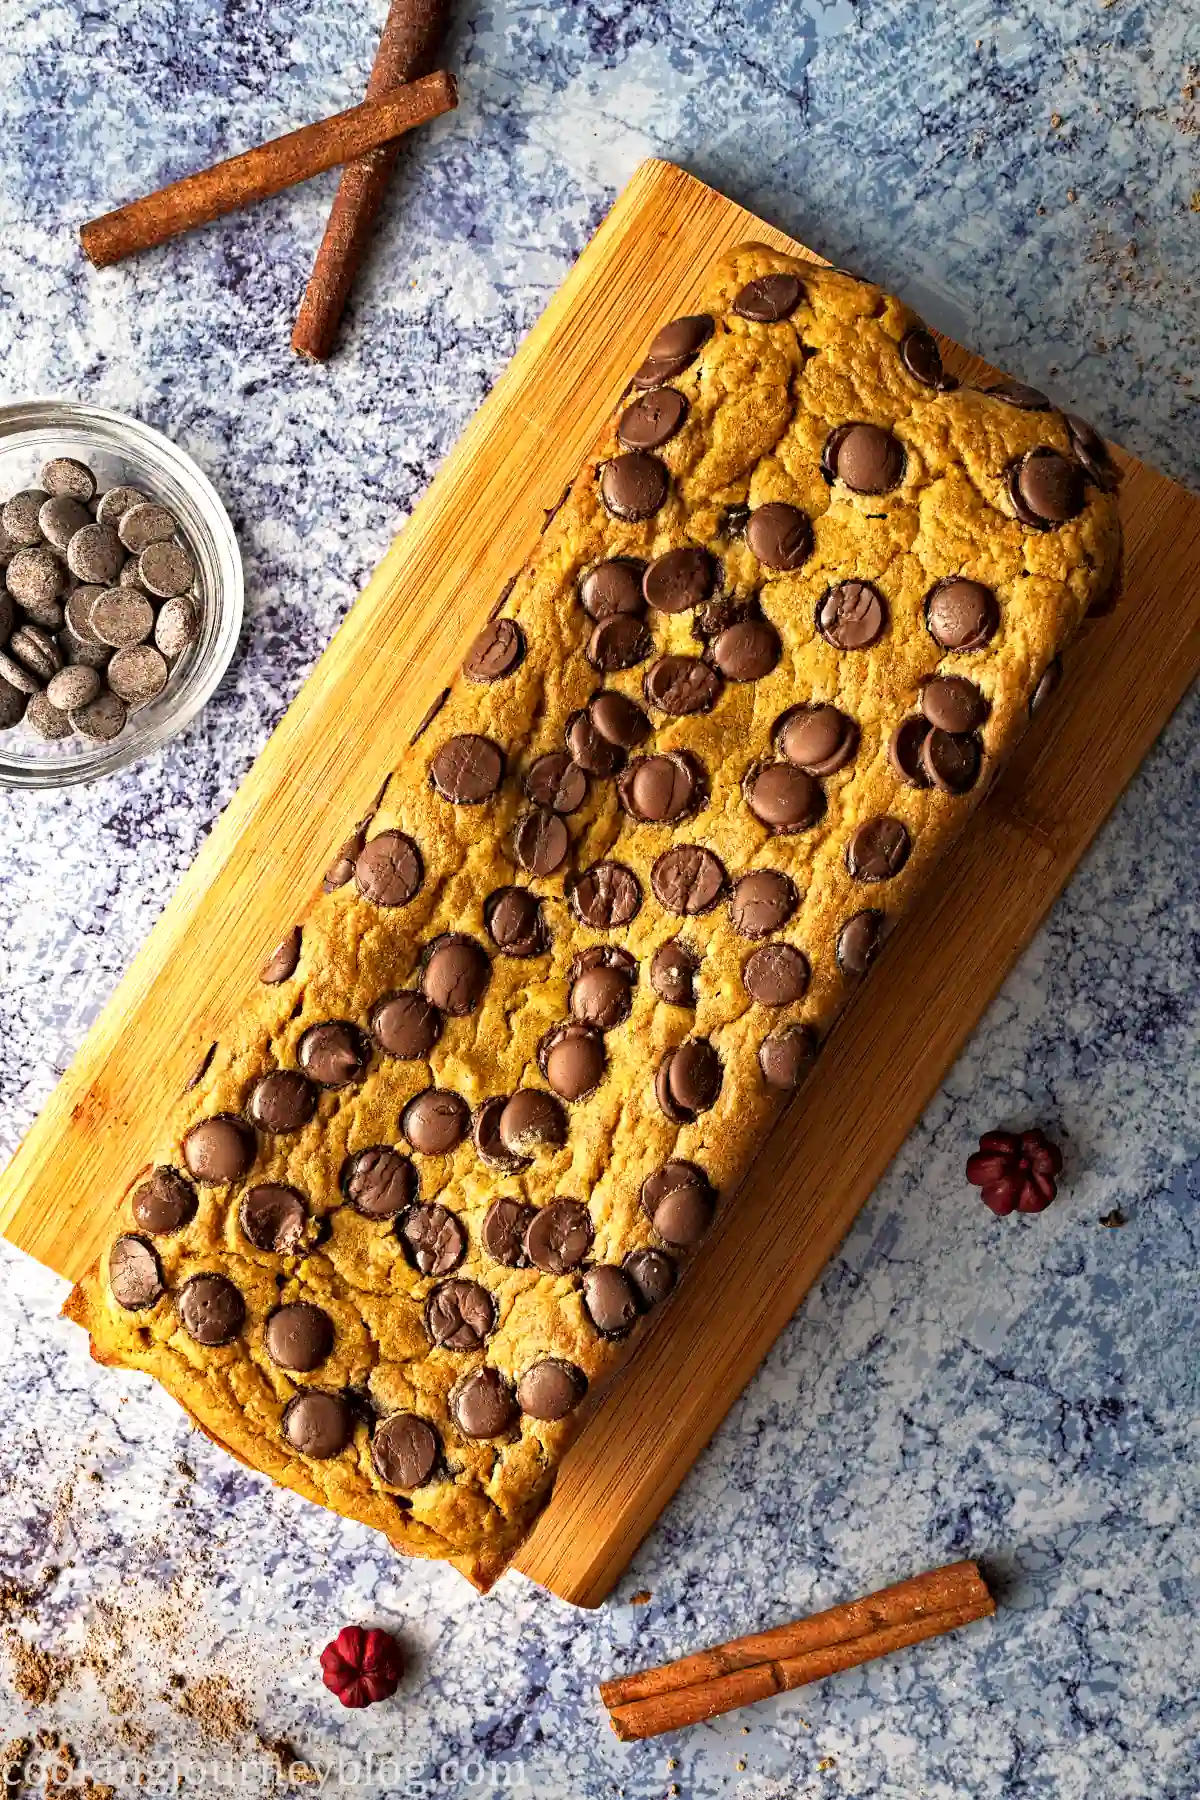 Pumpkin chocolate chip bread, view from top, served with chocolate chips and cinnamon sticks on a blue table.